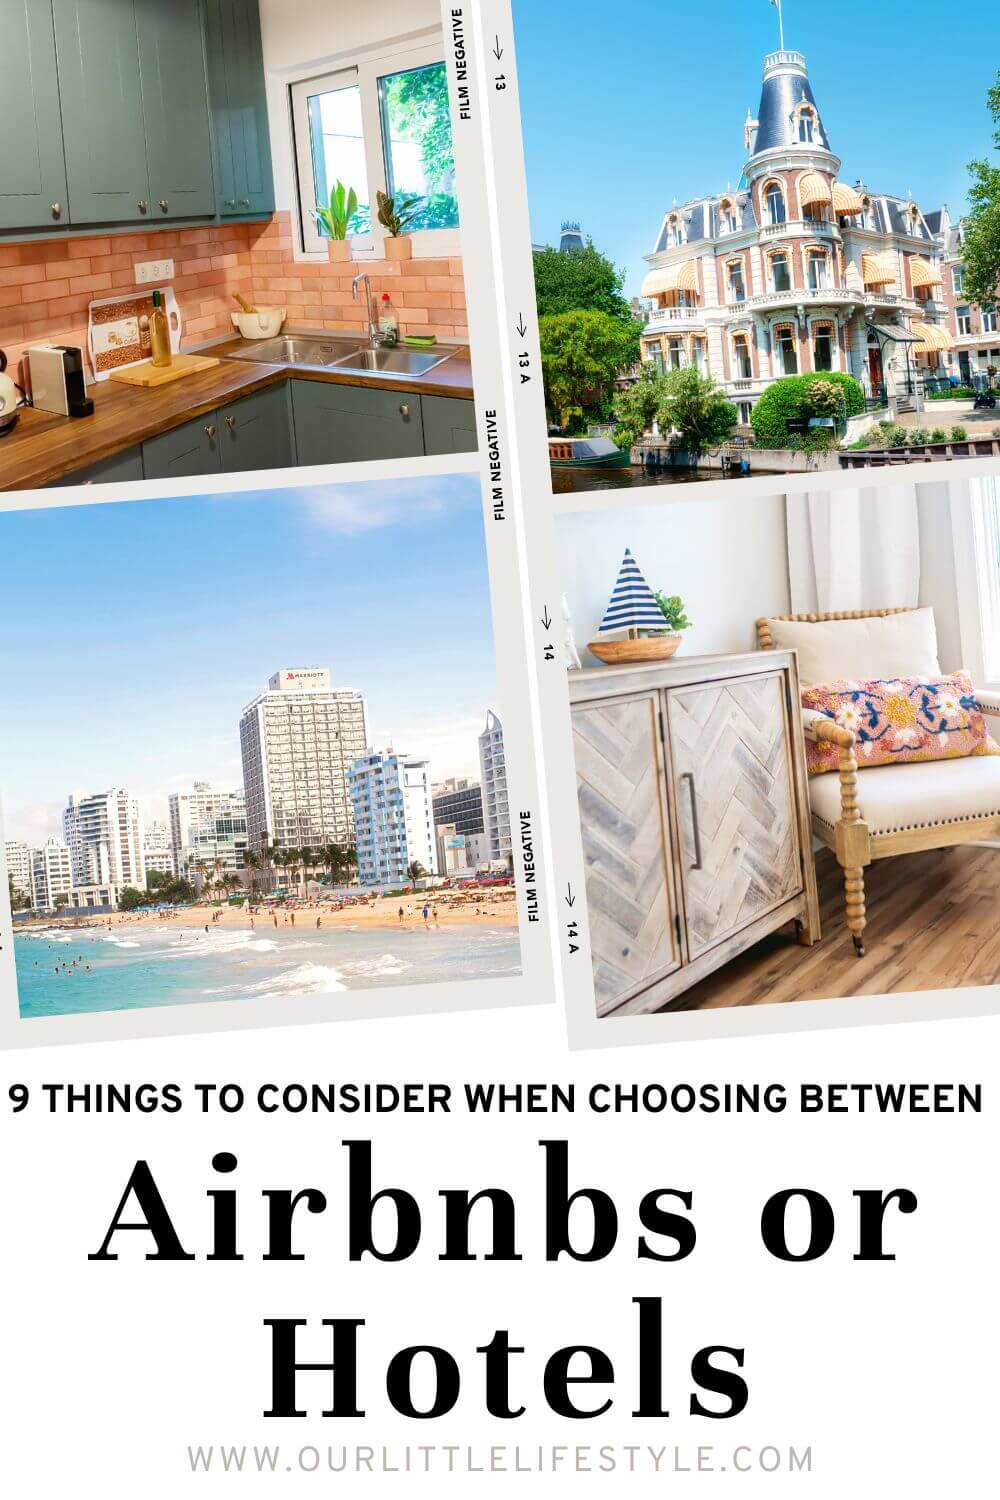 Airbnb or Hotels